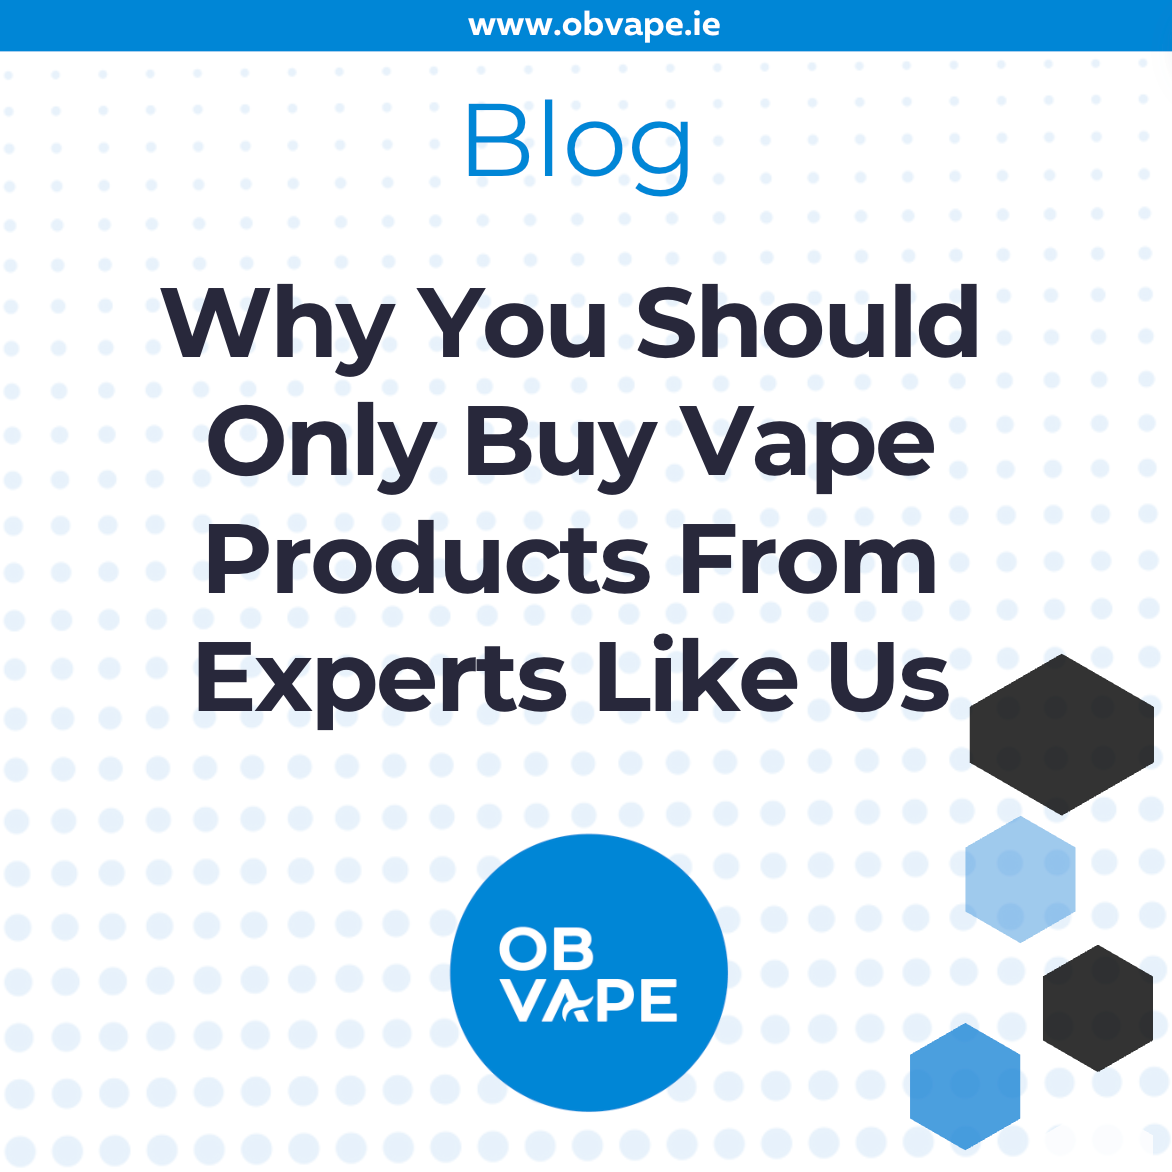 Why You Should Only Buy Vape Products From Experts Like Us